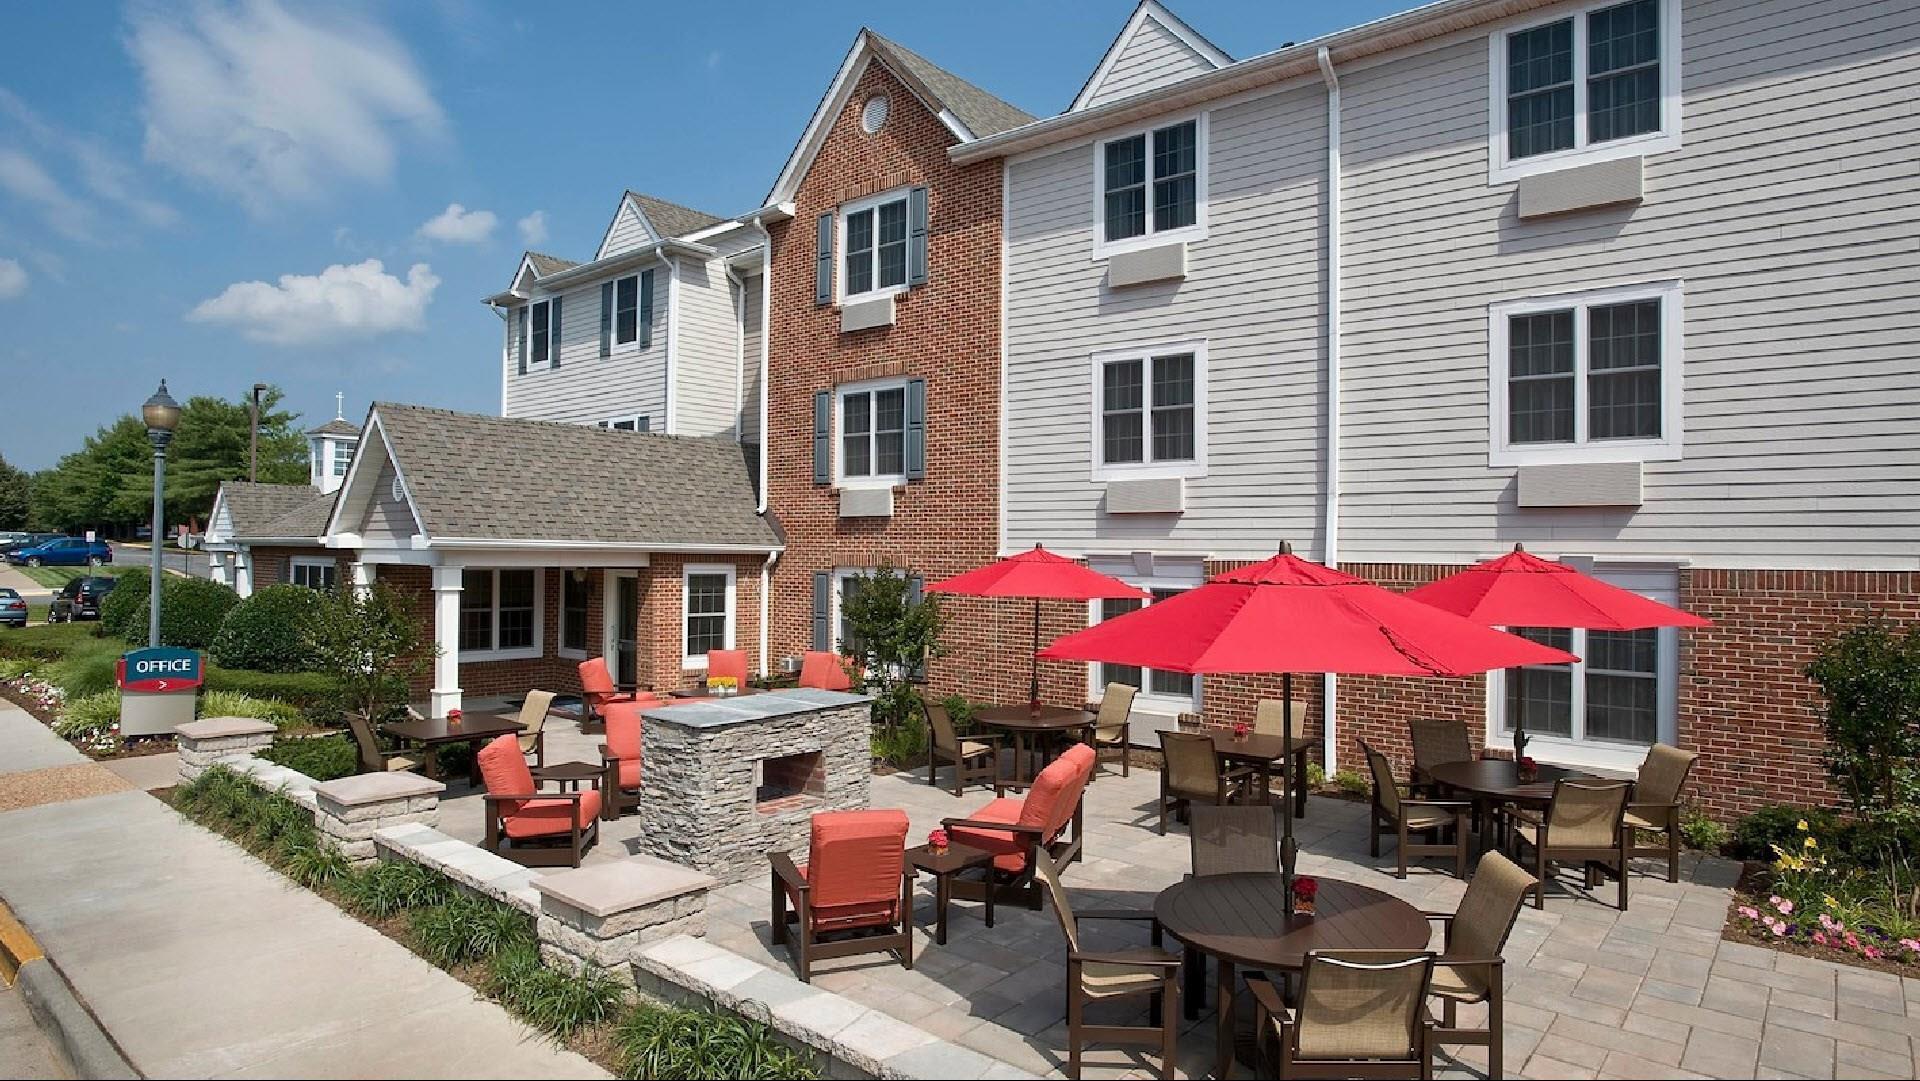 TownePlace Suites Dulles Airport in Sterling, VA